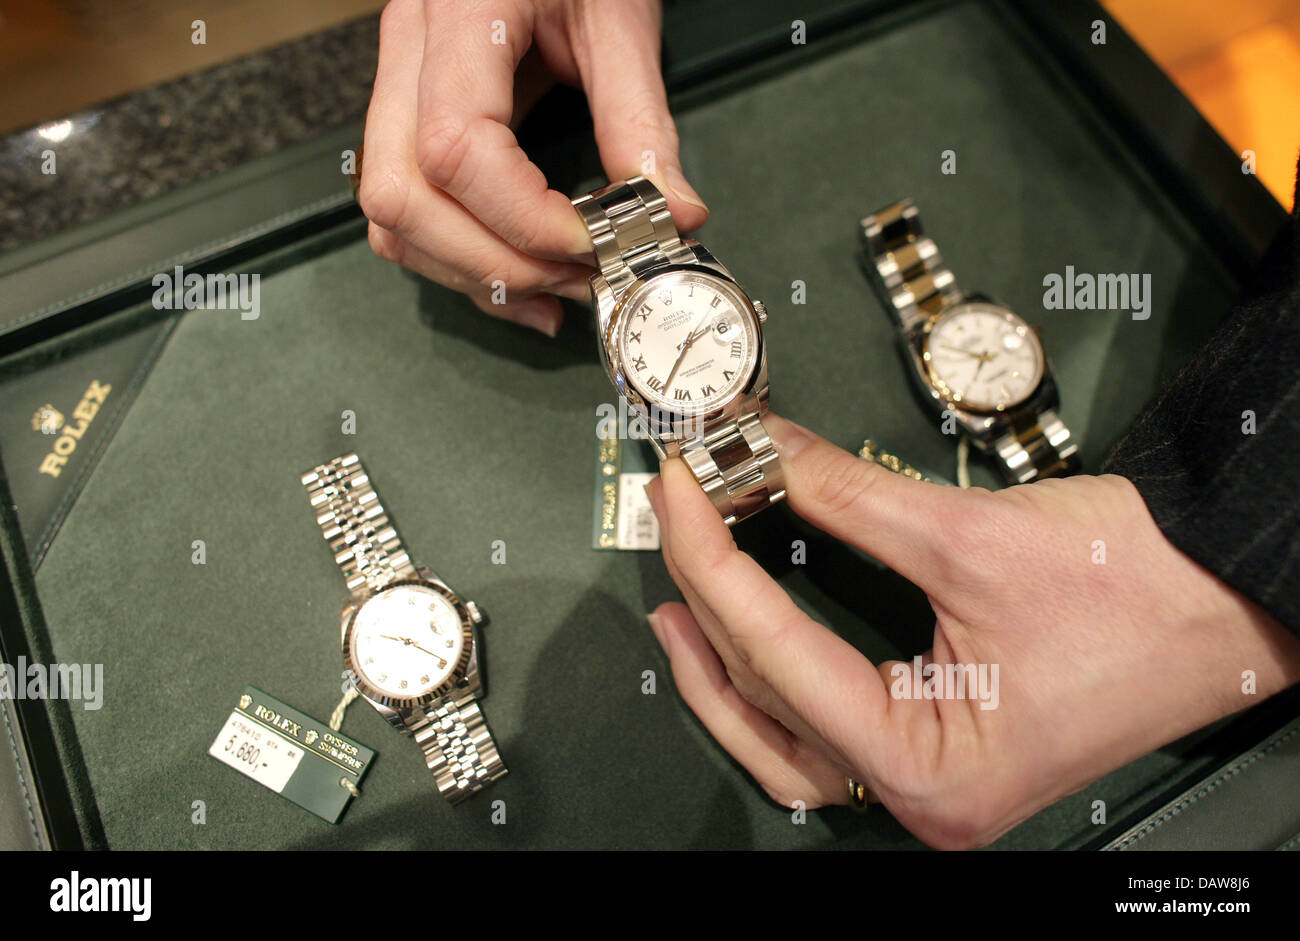 Nicole Blome-Hardorp presents a selection of Rolex luxury wrist watches in  the clock shop 'Uhren Blome' at the Koenigsallee in Duesseldorf, Germany,  Monday, 22 January 2007. Photo: Rolf Vennenbernd Stock Photo - Alamy